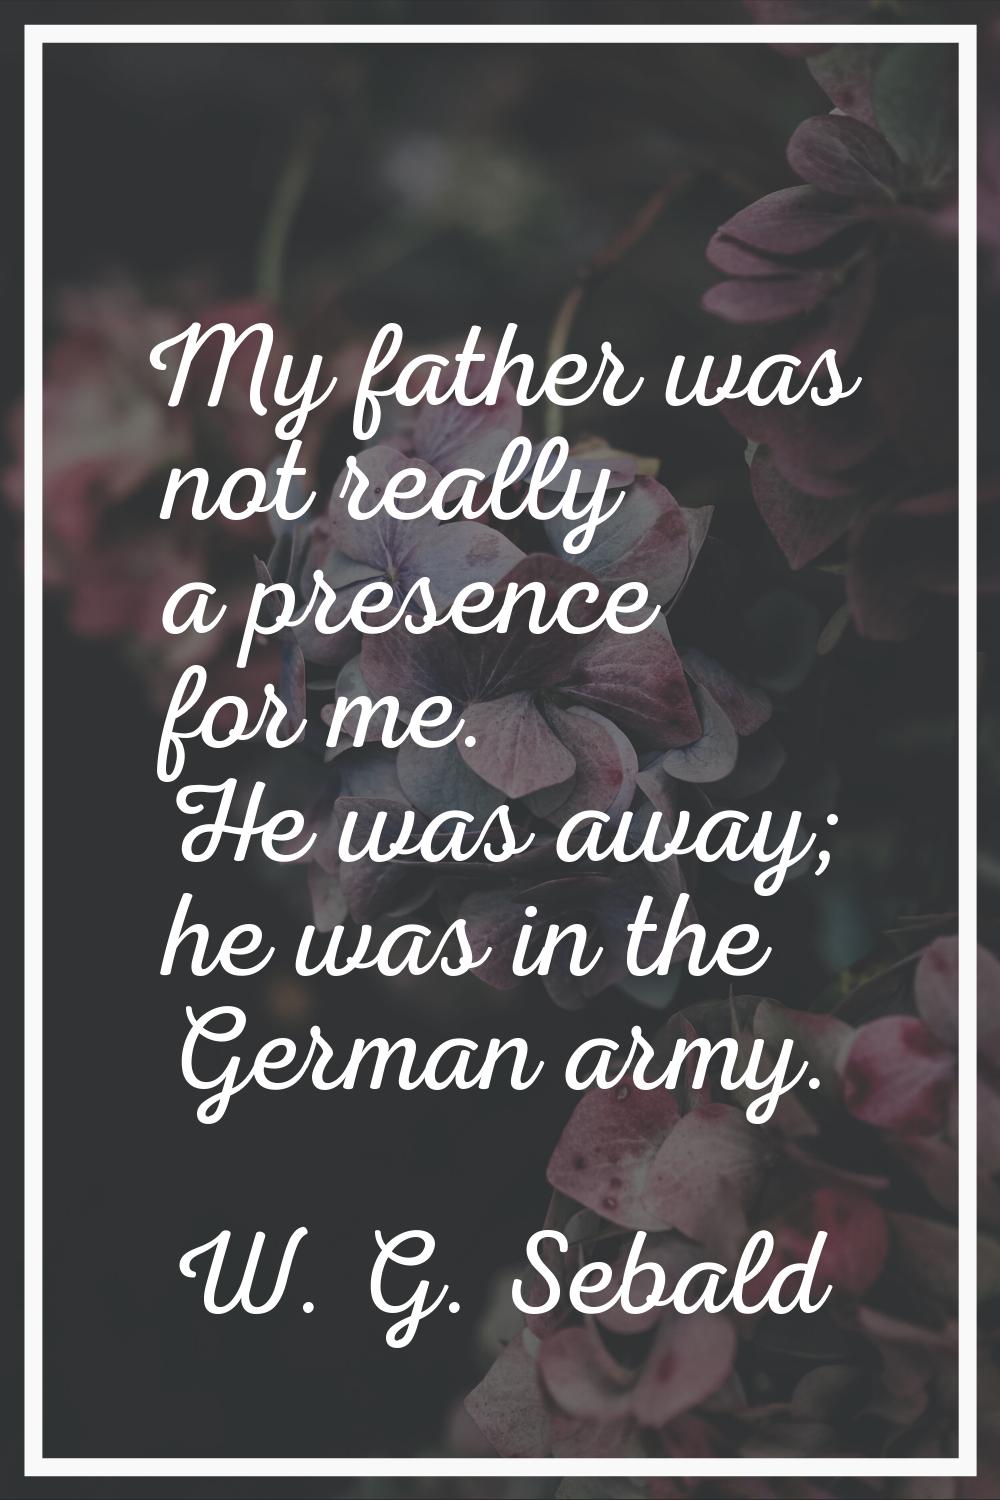 My father was not really a presence for me. He was away; he was in the German army.